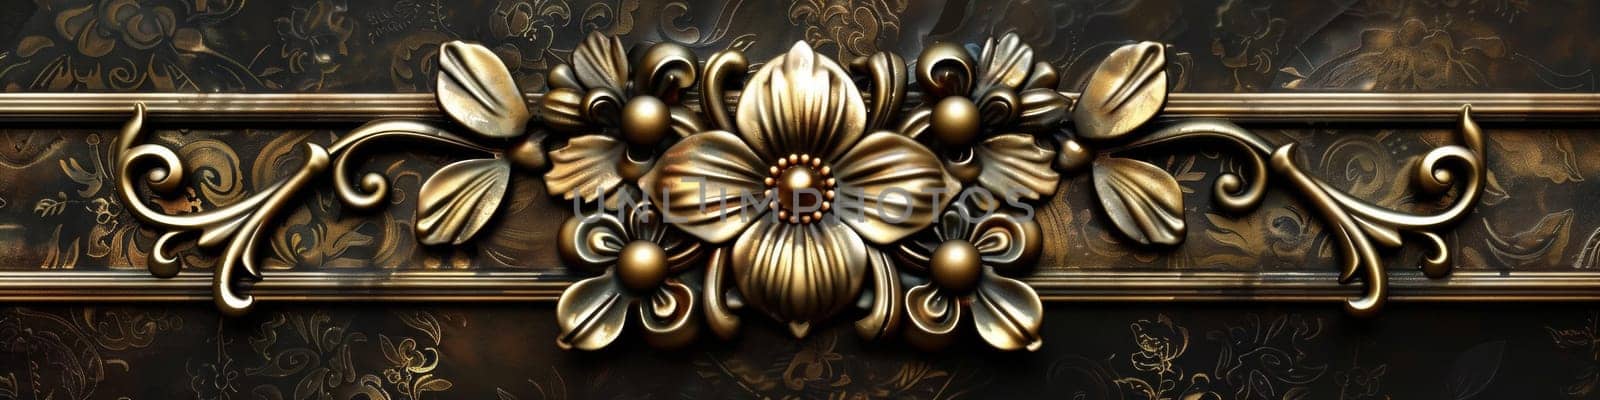 A decorative metal design on a wall with gold flowers, AI by starush